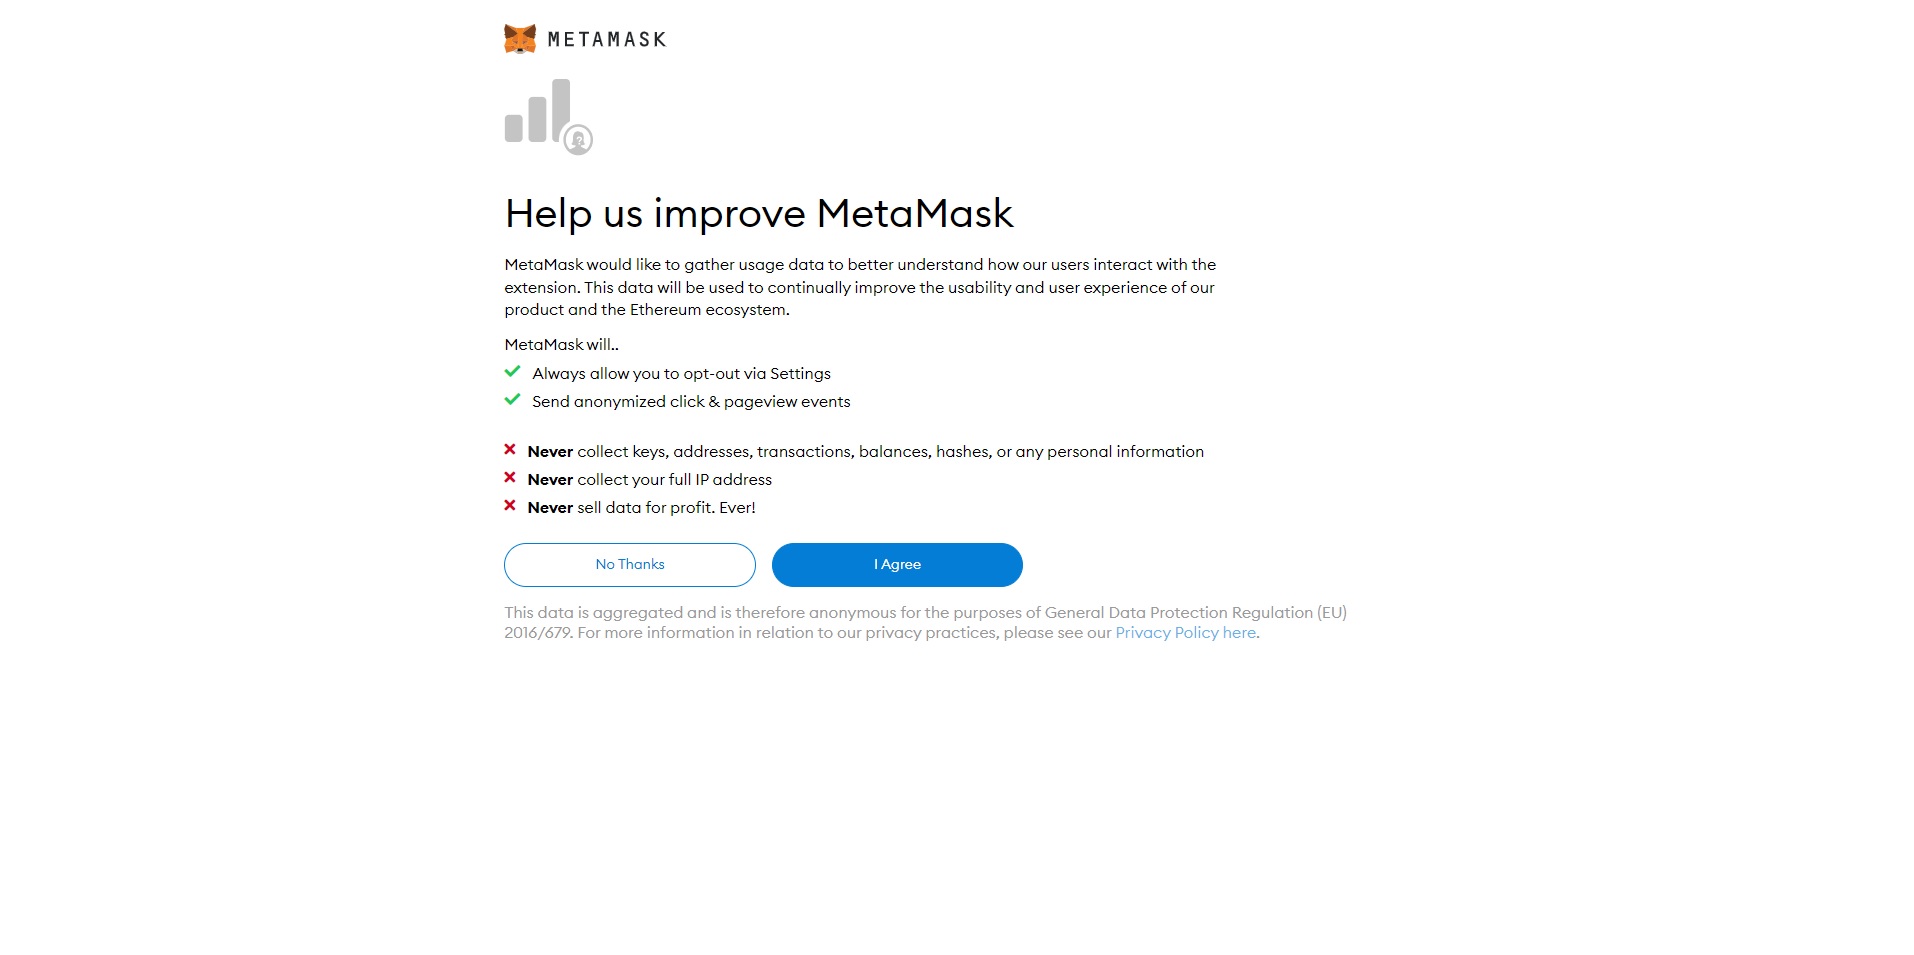 How to use Metamask